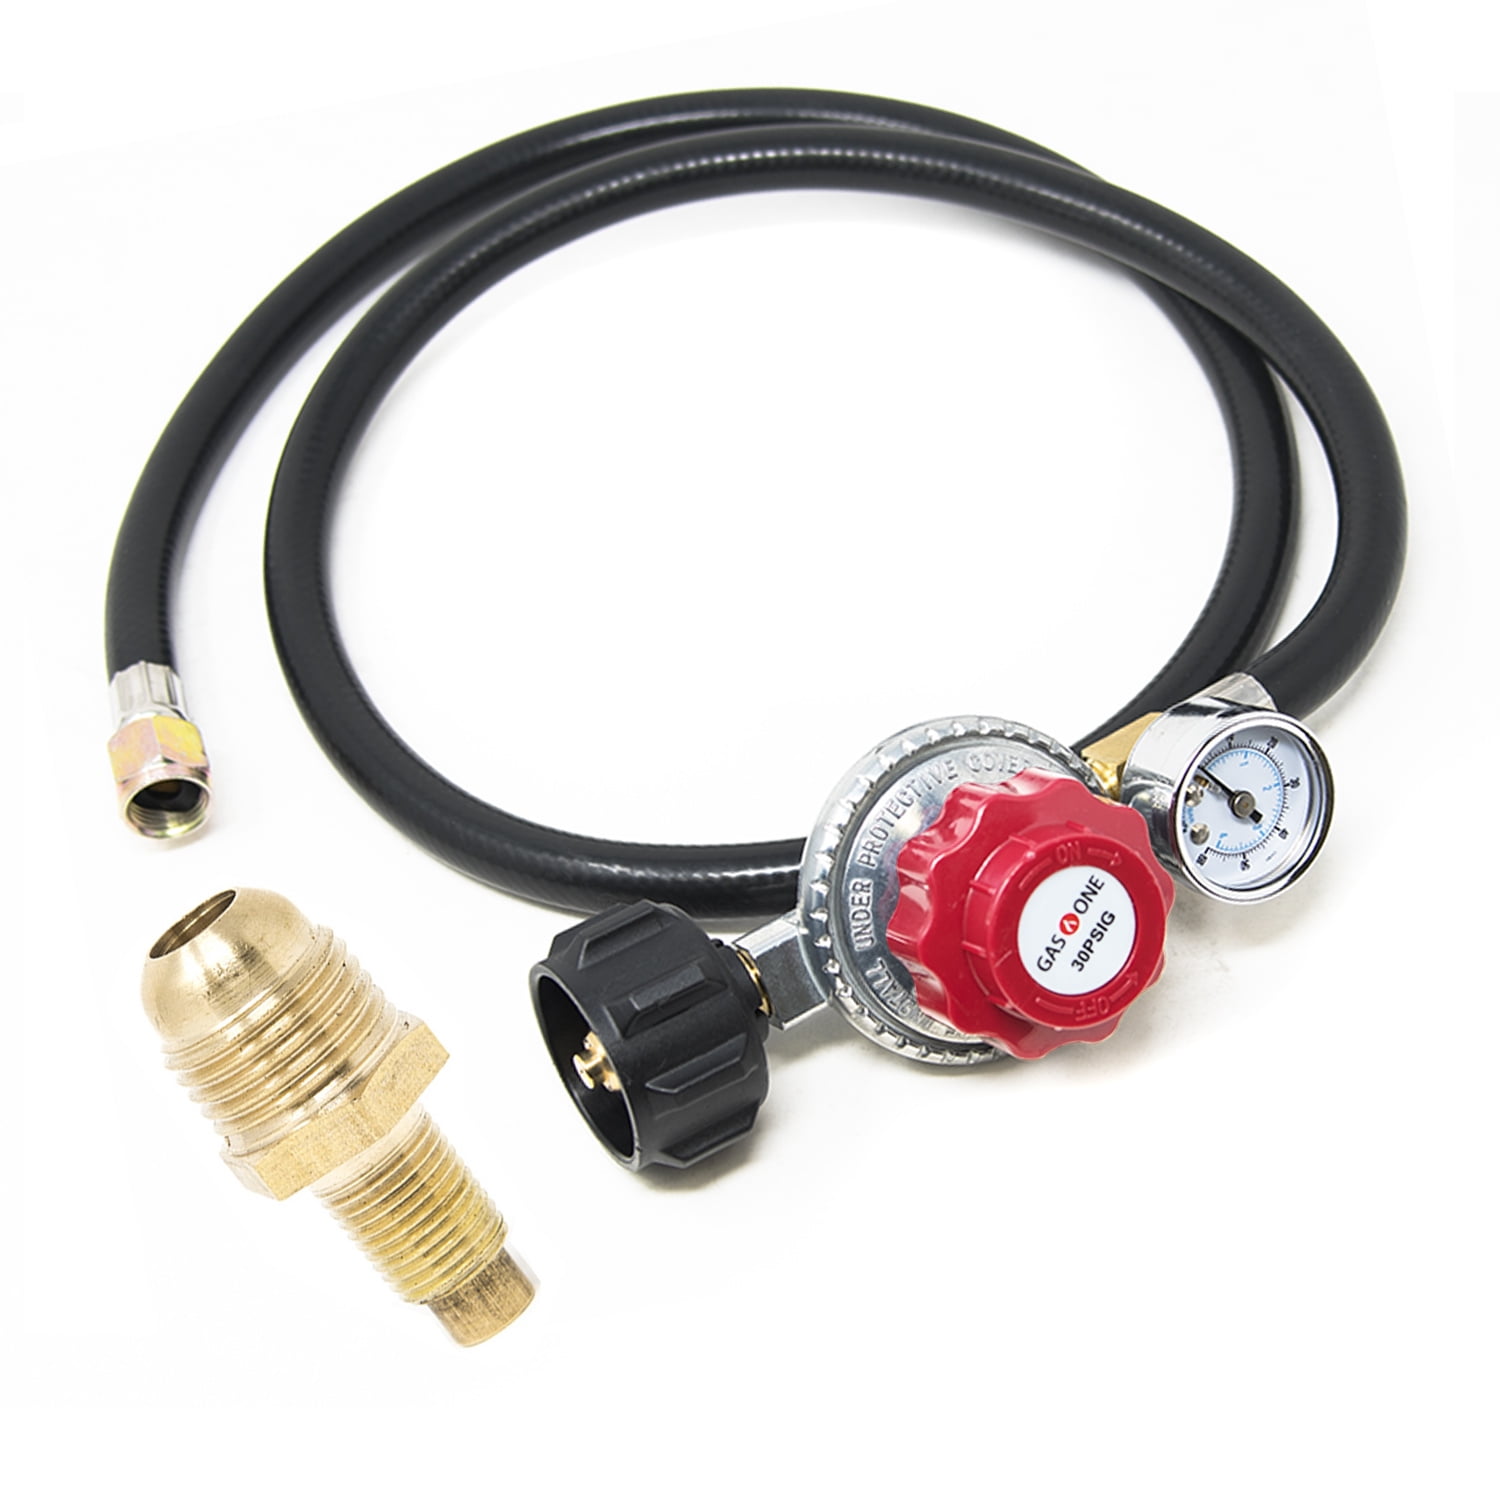 Details about   Gas Stove Head Connecting Hoses Adapter Hose Connector Regulator Outdoor Camping